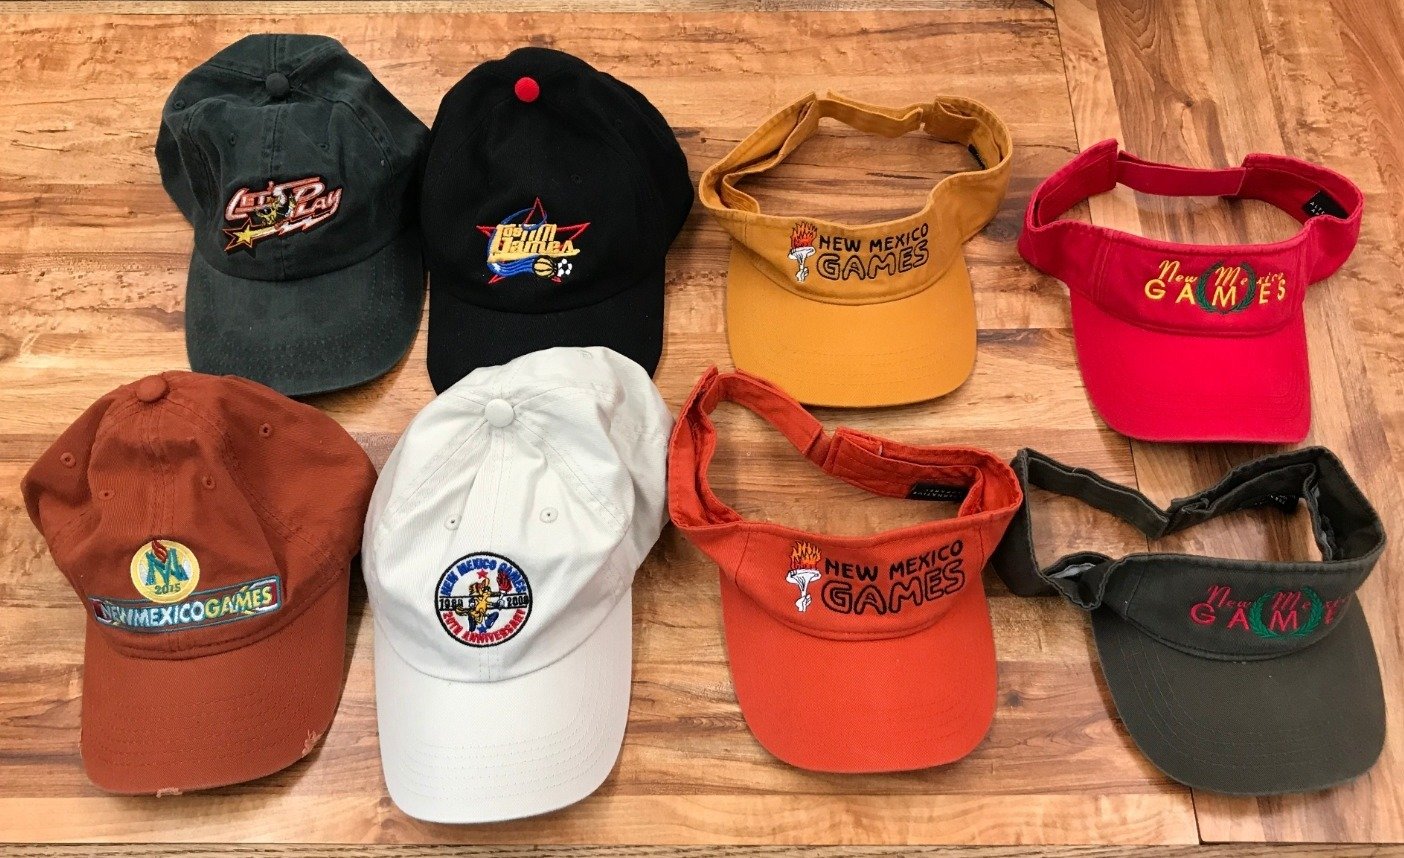 New Mexico Games Variety Hats & Visors $15 each